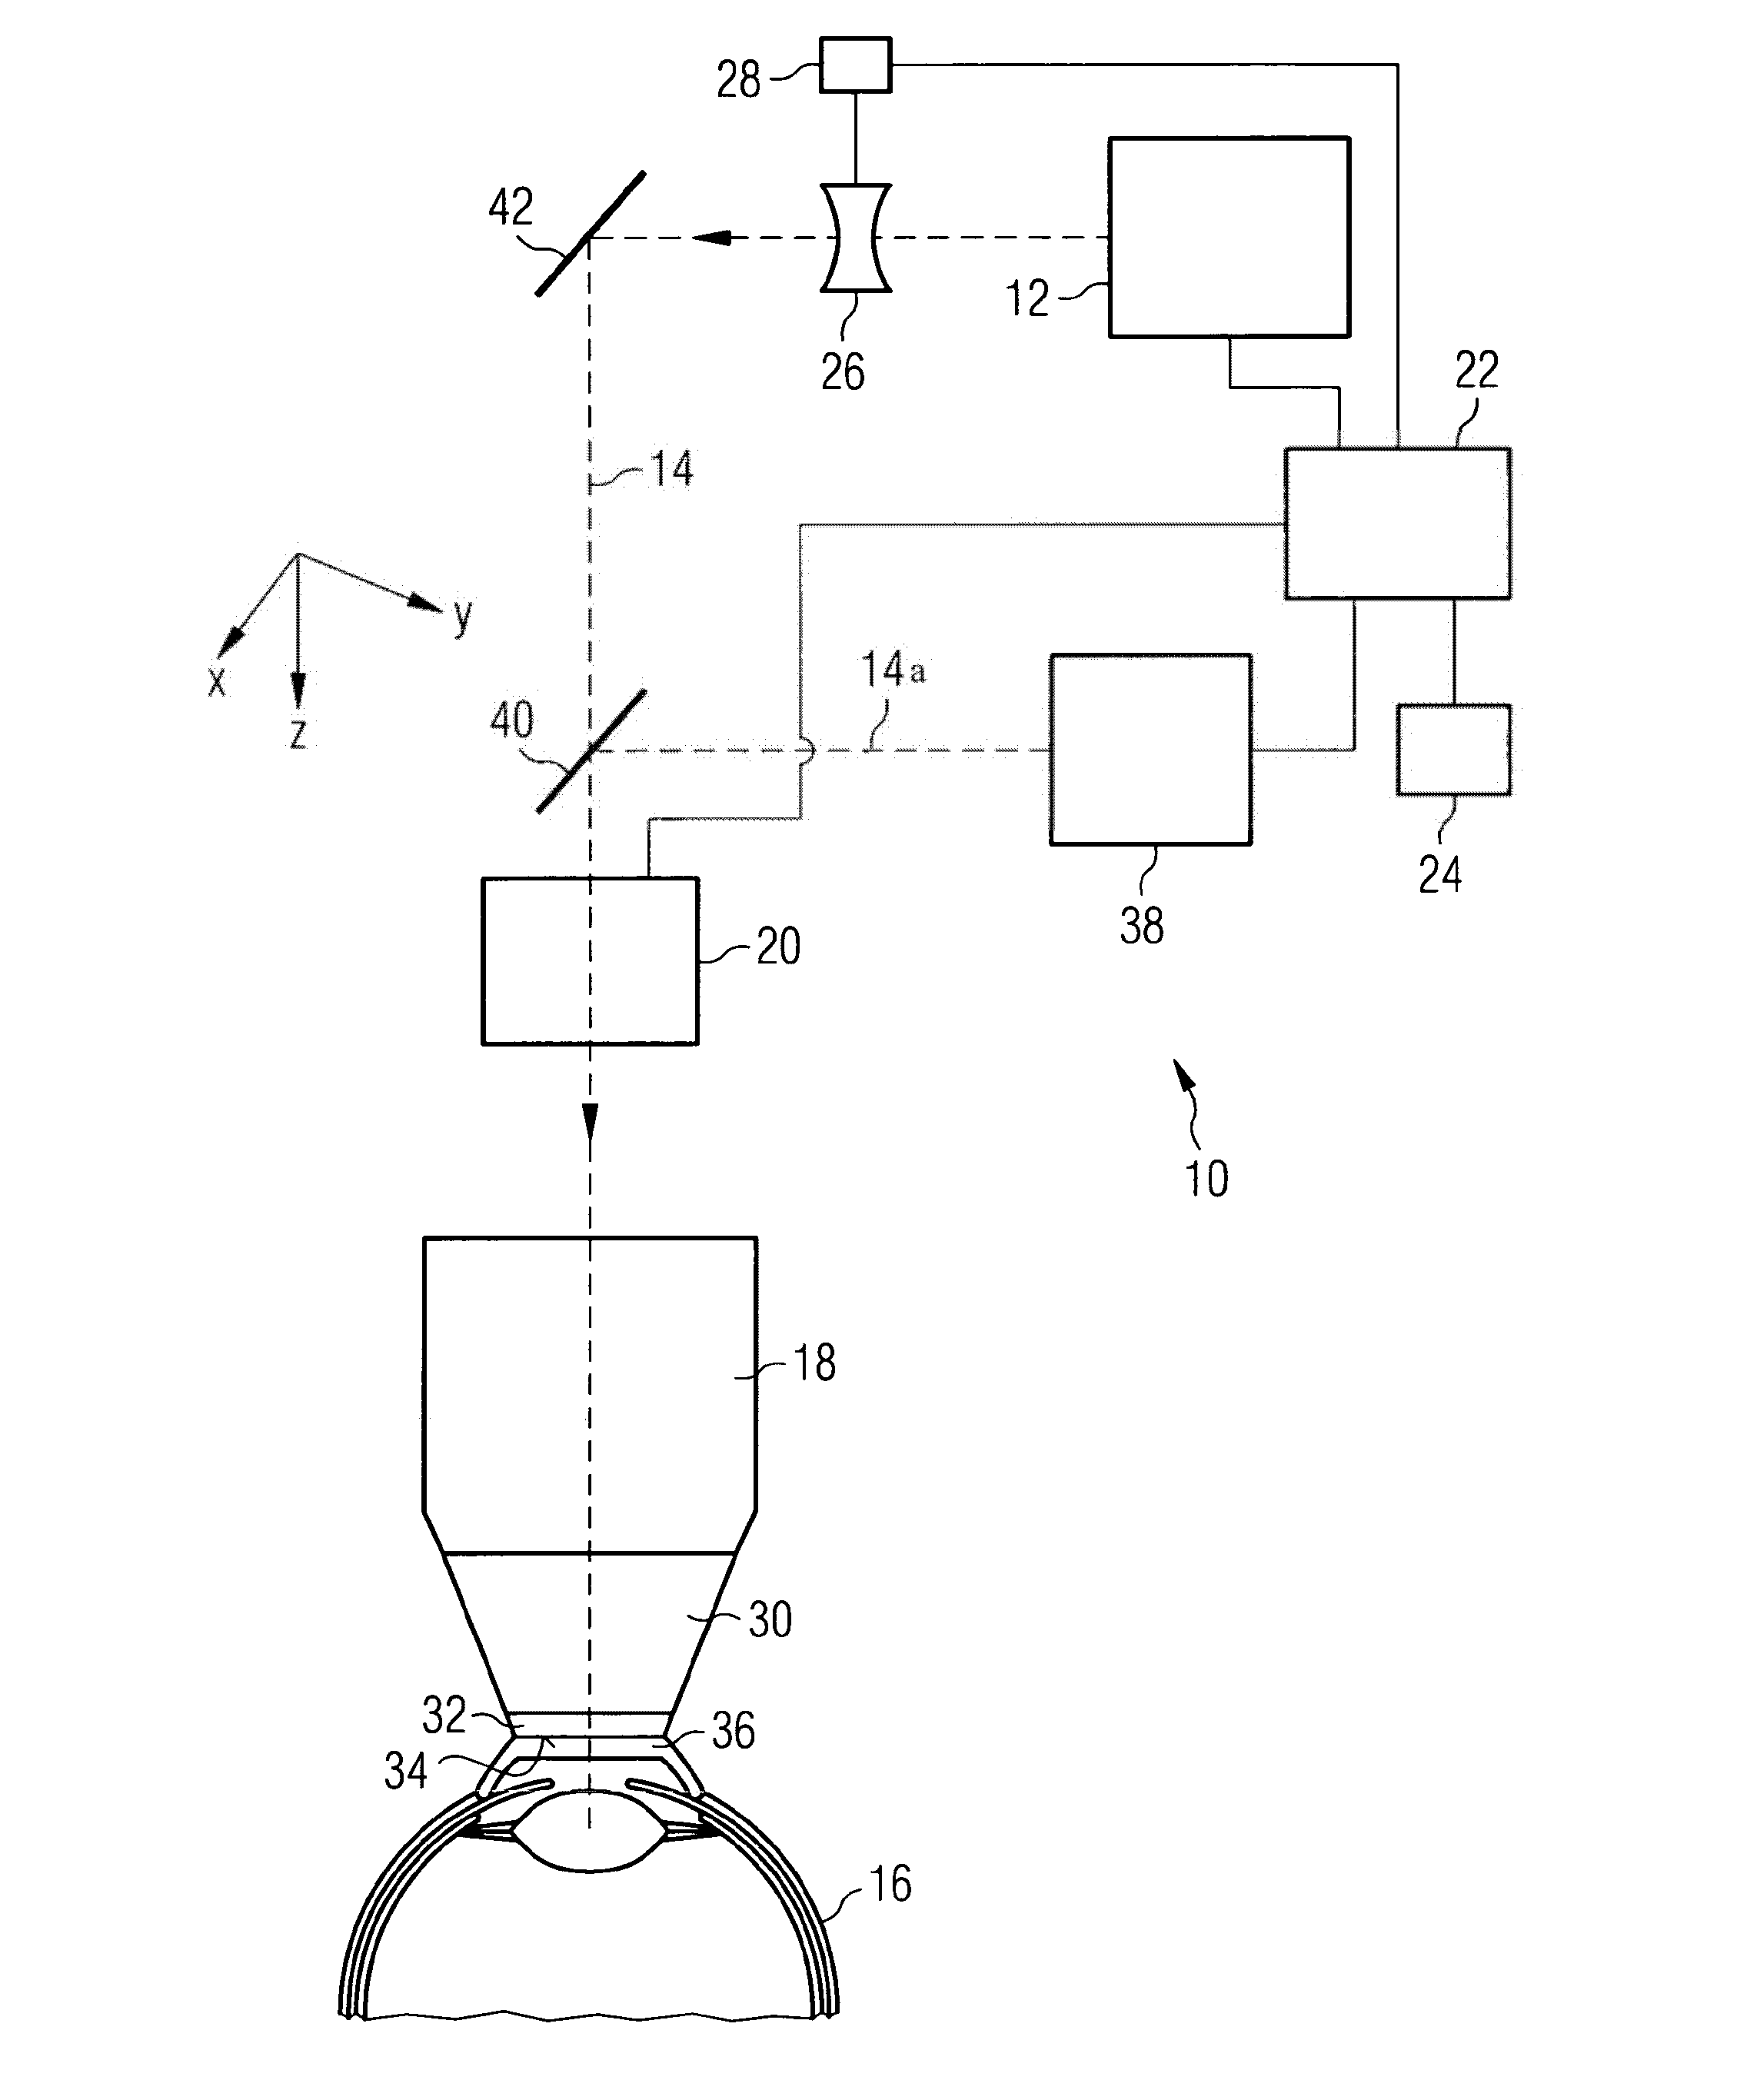 Apparatus for ophthalmological laser surgery